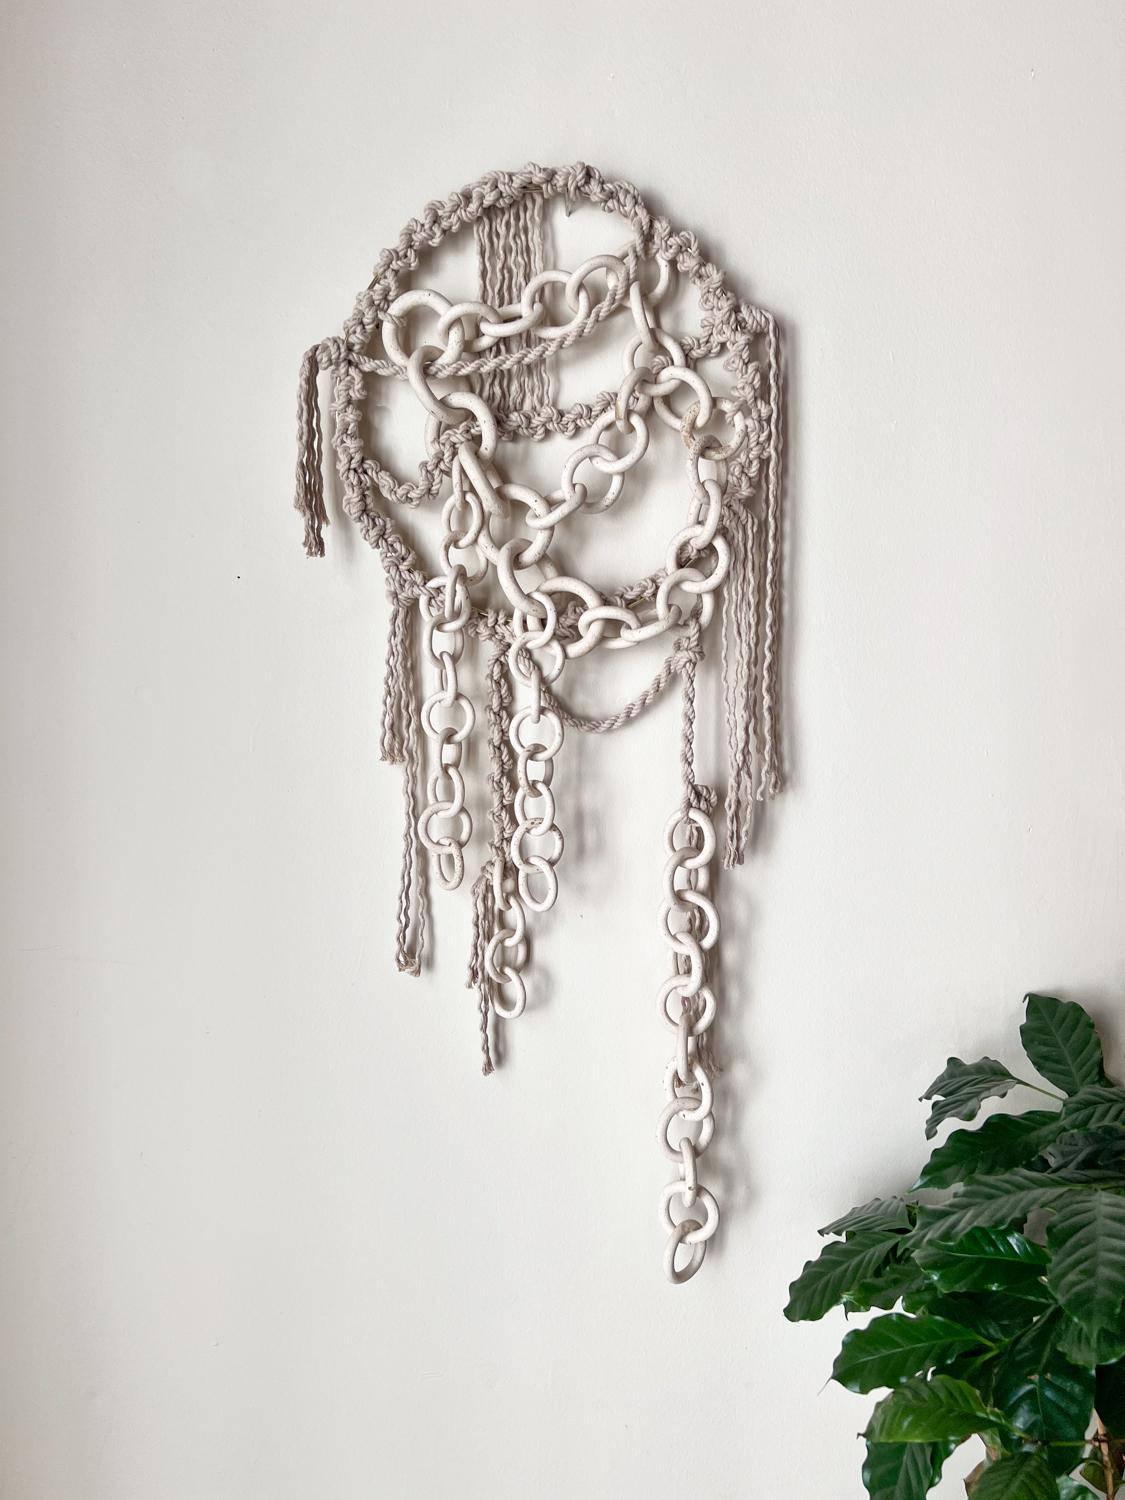 Bohemian Ceramic Link Chain Wall Sculpture For Sale